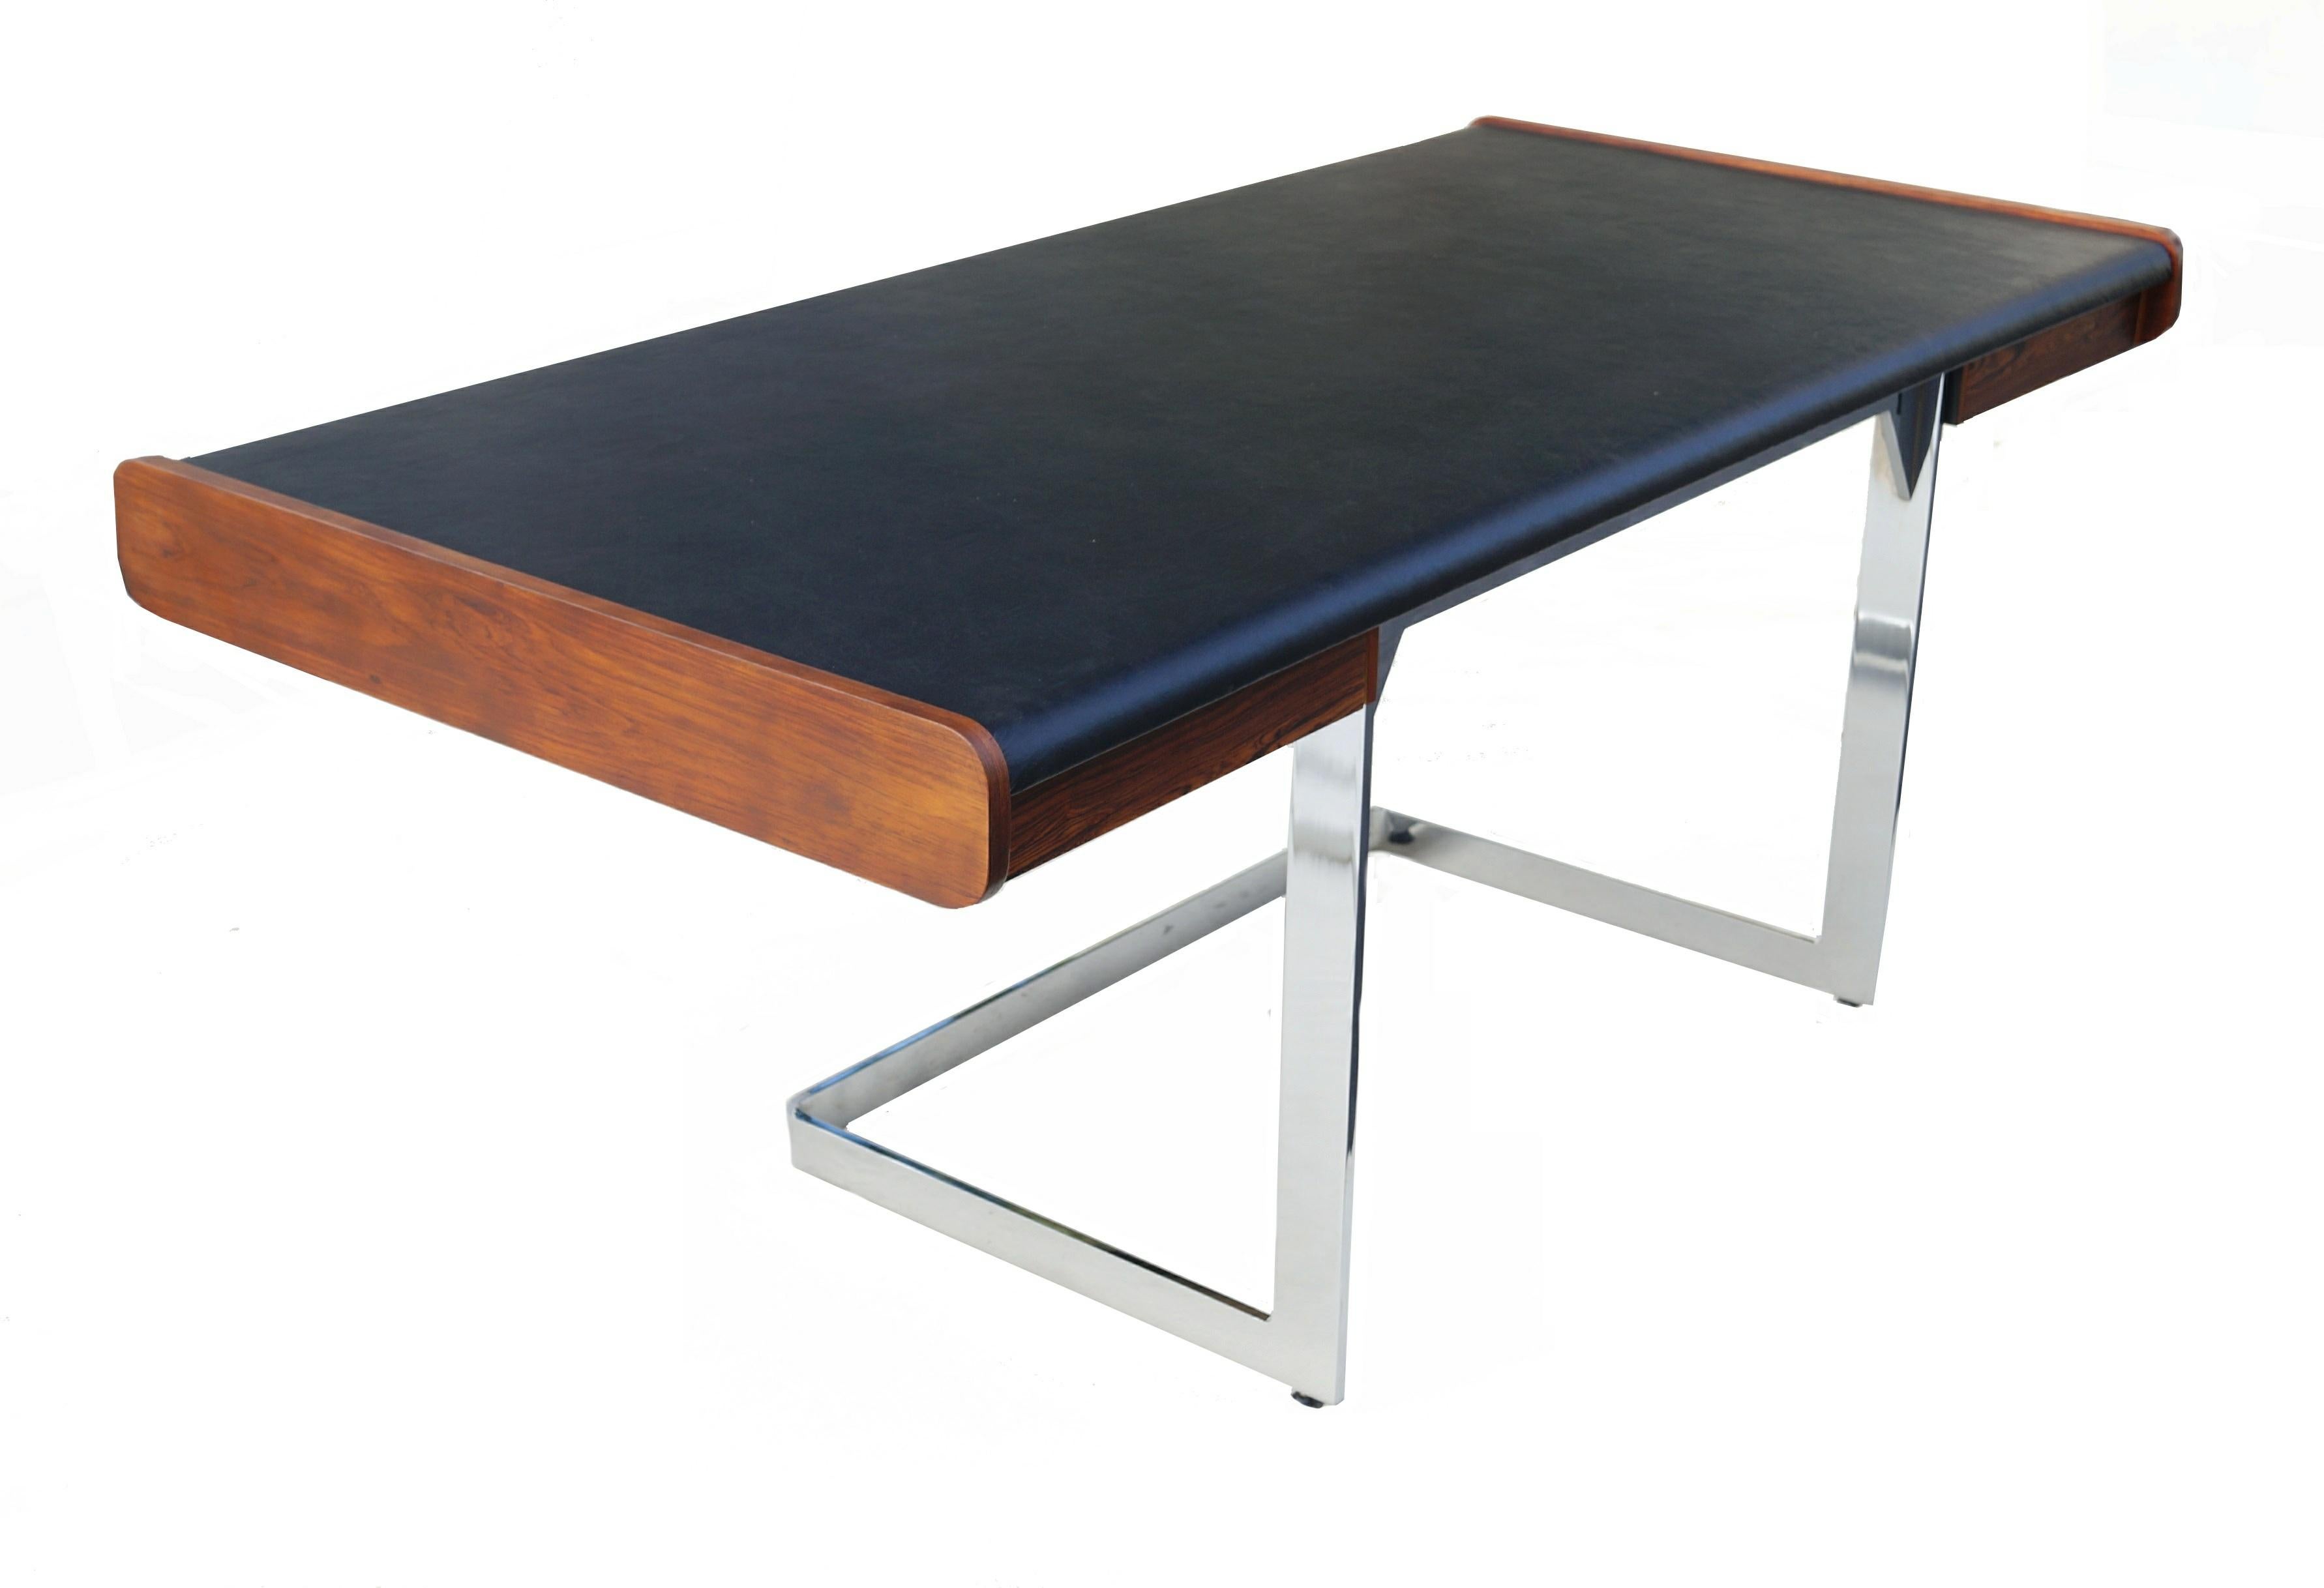 Mid-Century Modern rosewood and chrome desk by Ste. Marie & Laurent. New faux leather vinyl top. The leg opening area is 24.75